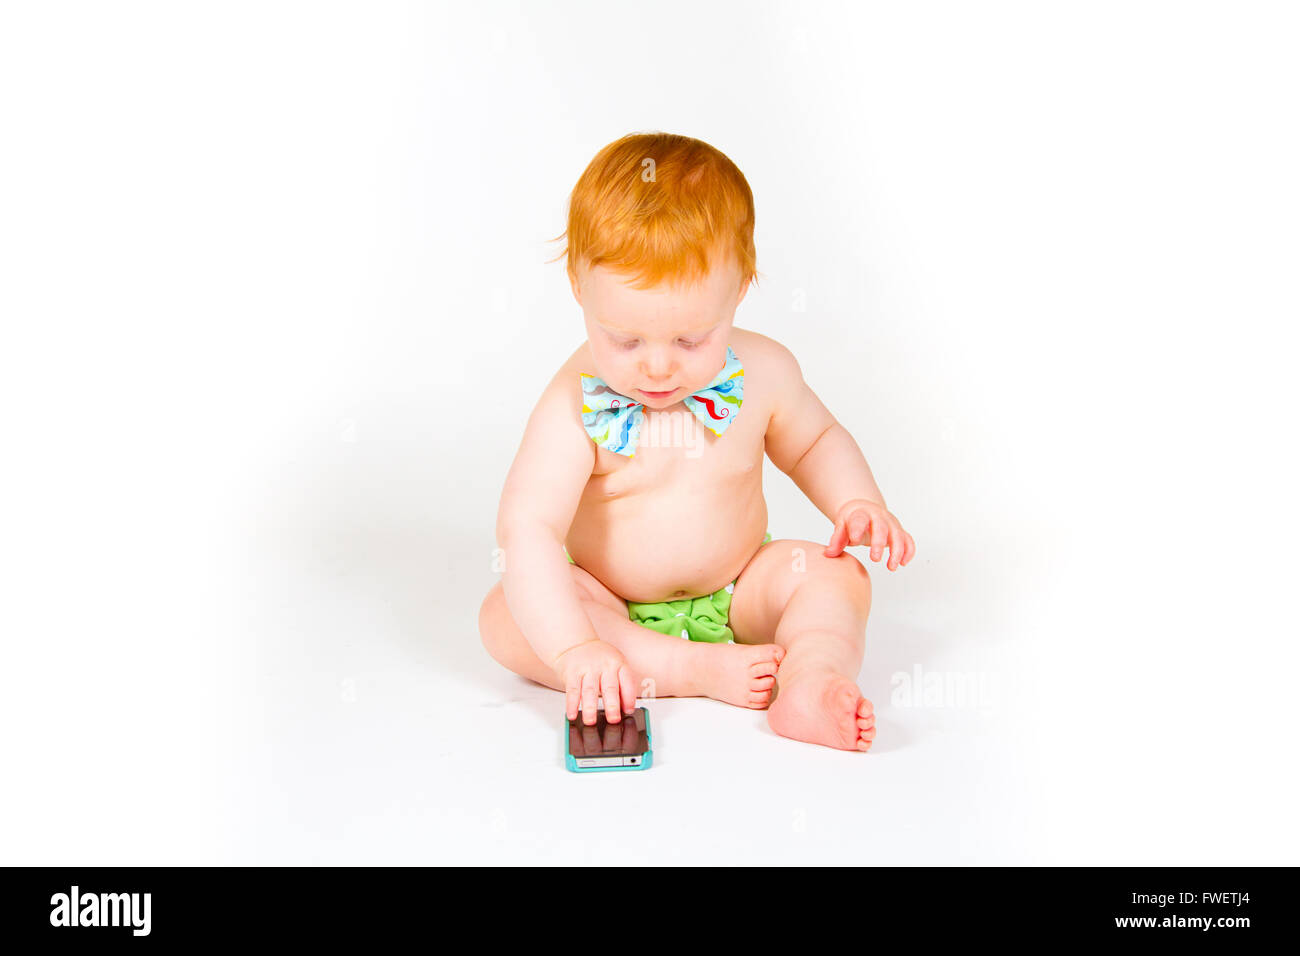 A one year old boy plays with a cell phone in the studio with a white background. Stock Photo